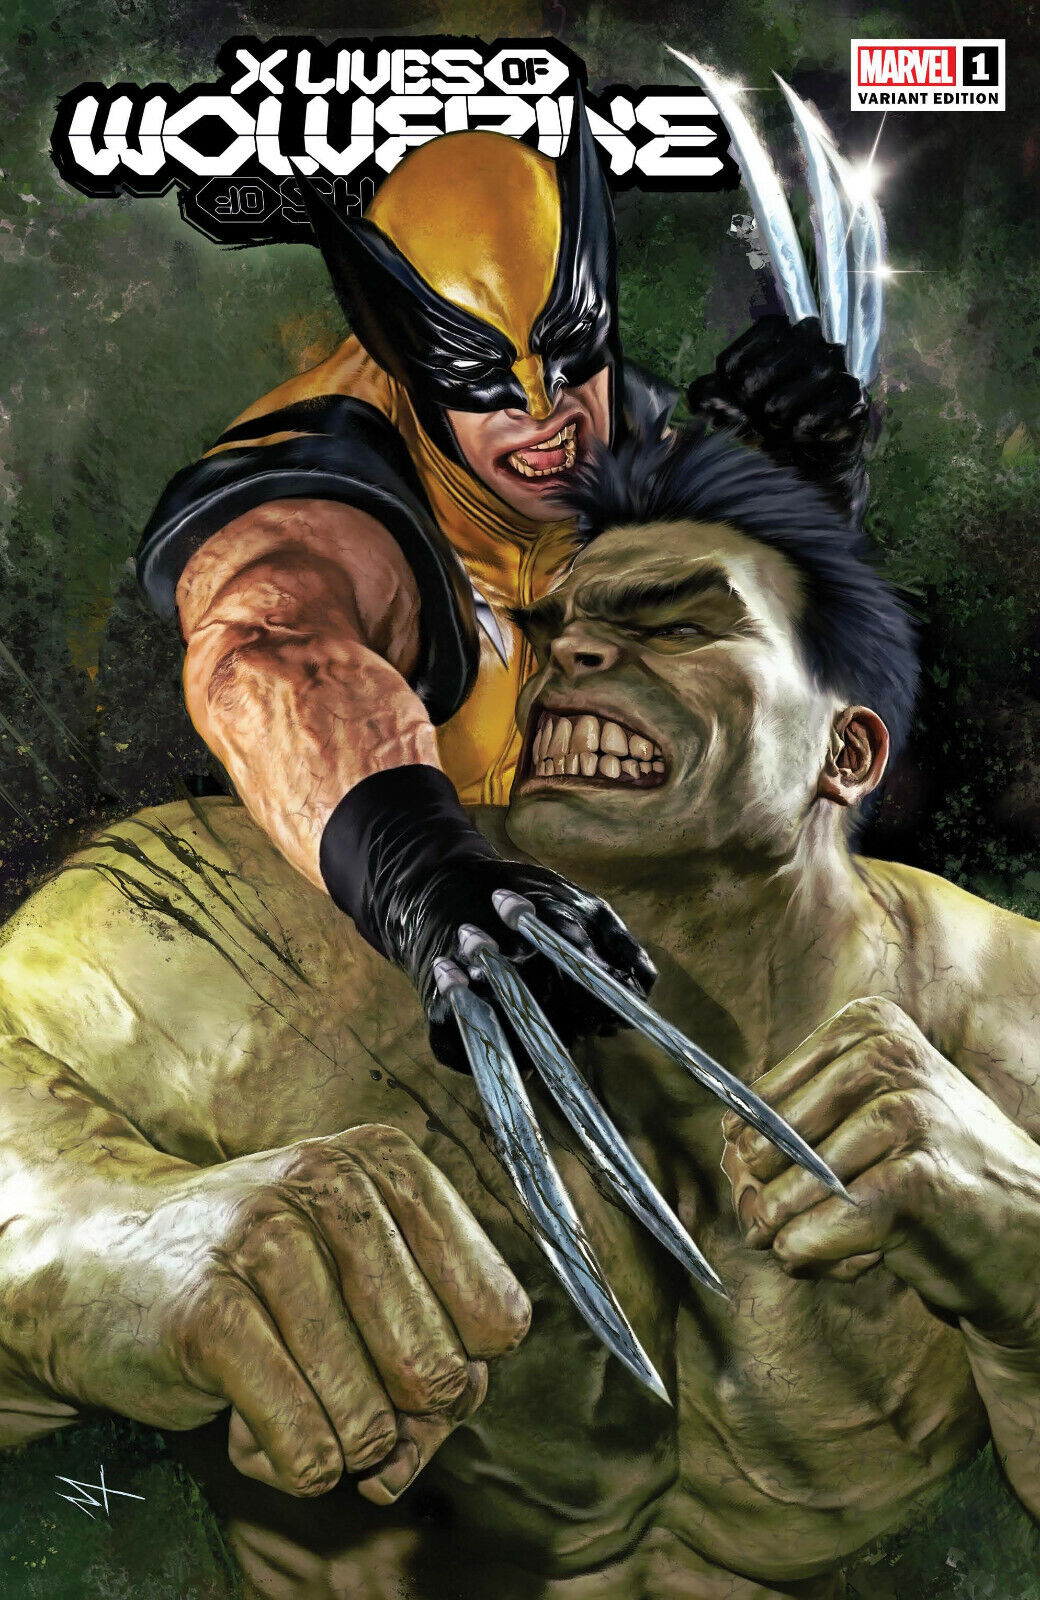 X LIVES OF WOLVERINE #1 (MARCO TURINI EXCLUSIVE VARIANT) COMIC - IN STOCK